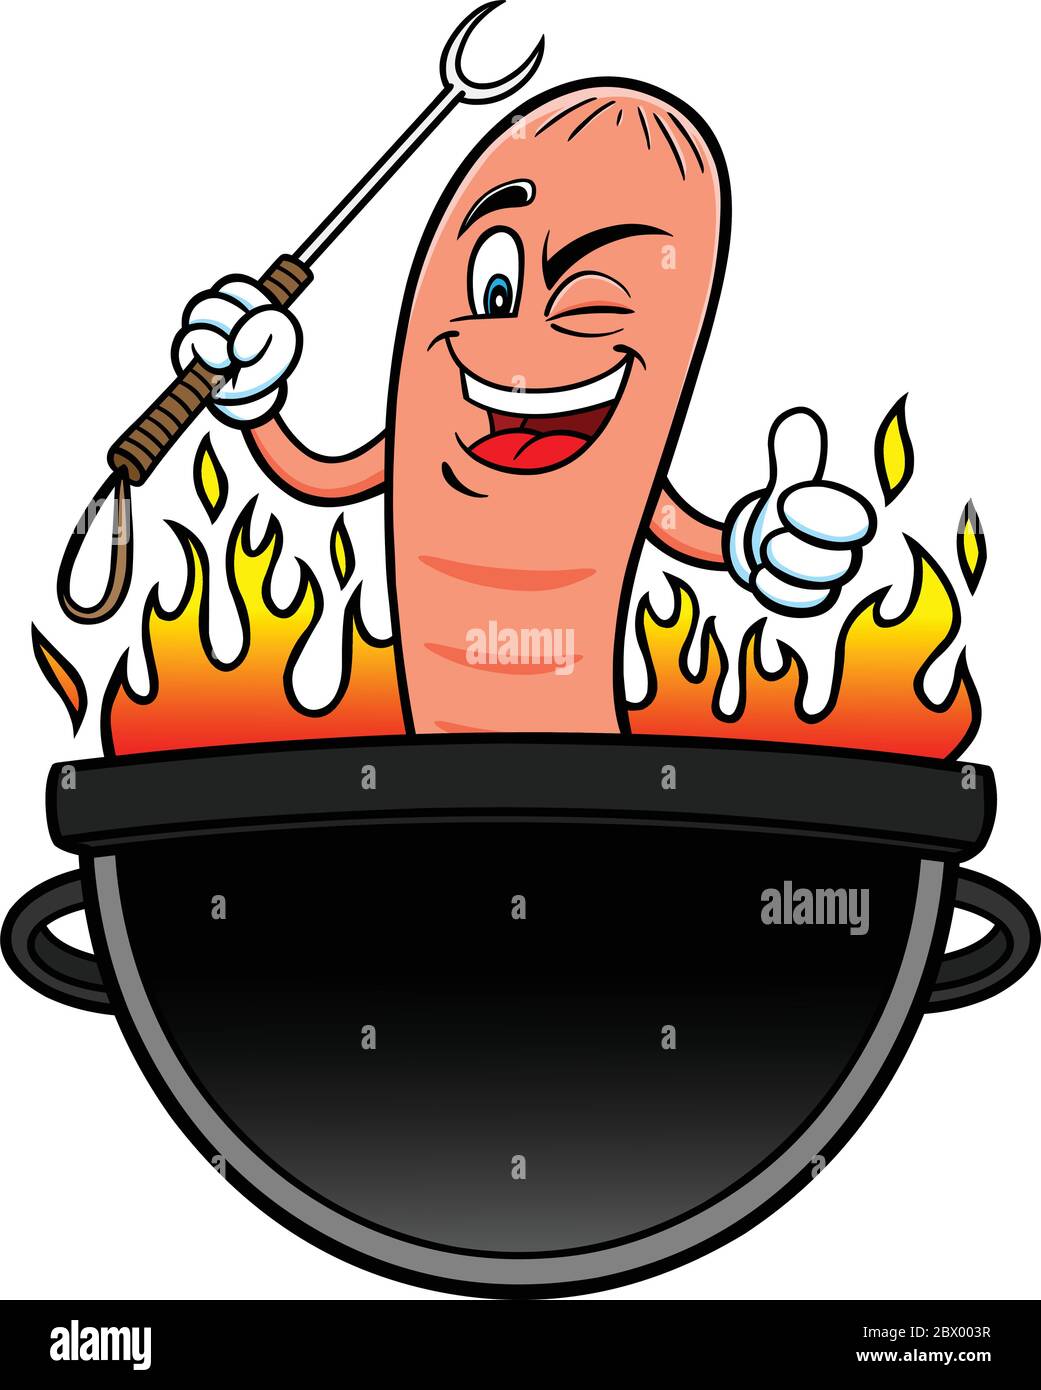 Hot Dog Grilling Party - A cartoon illustration of a Hot Dog Grilling Party. Stock Vector